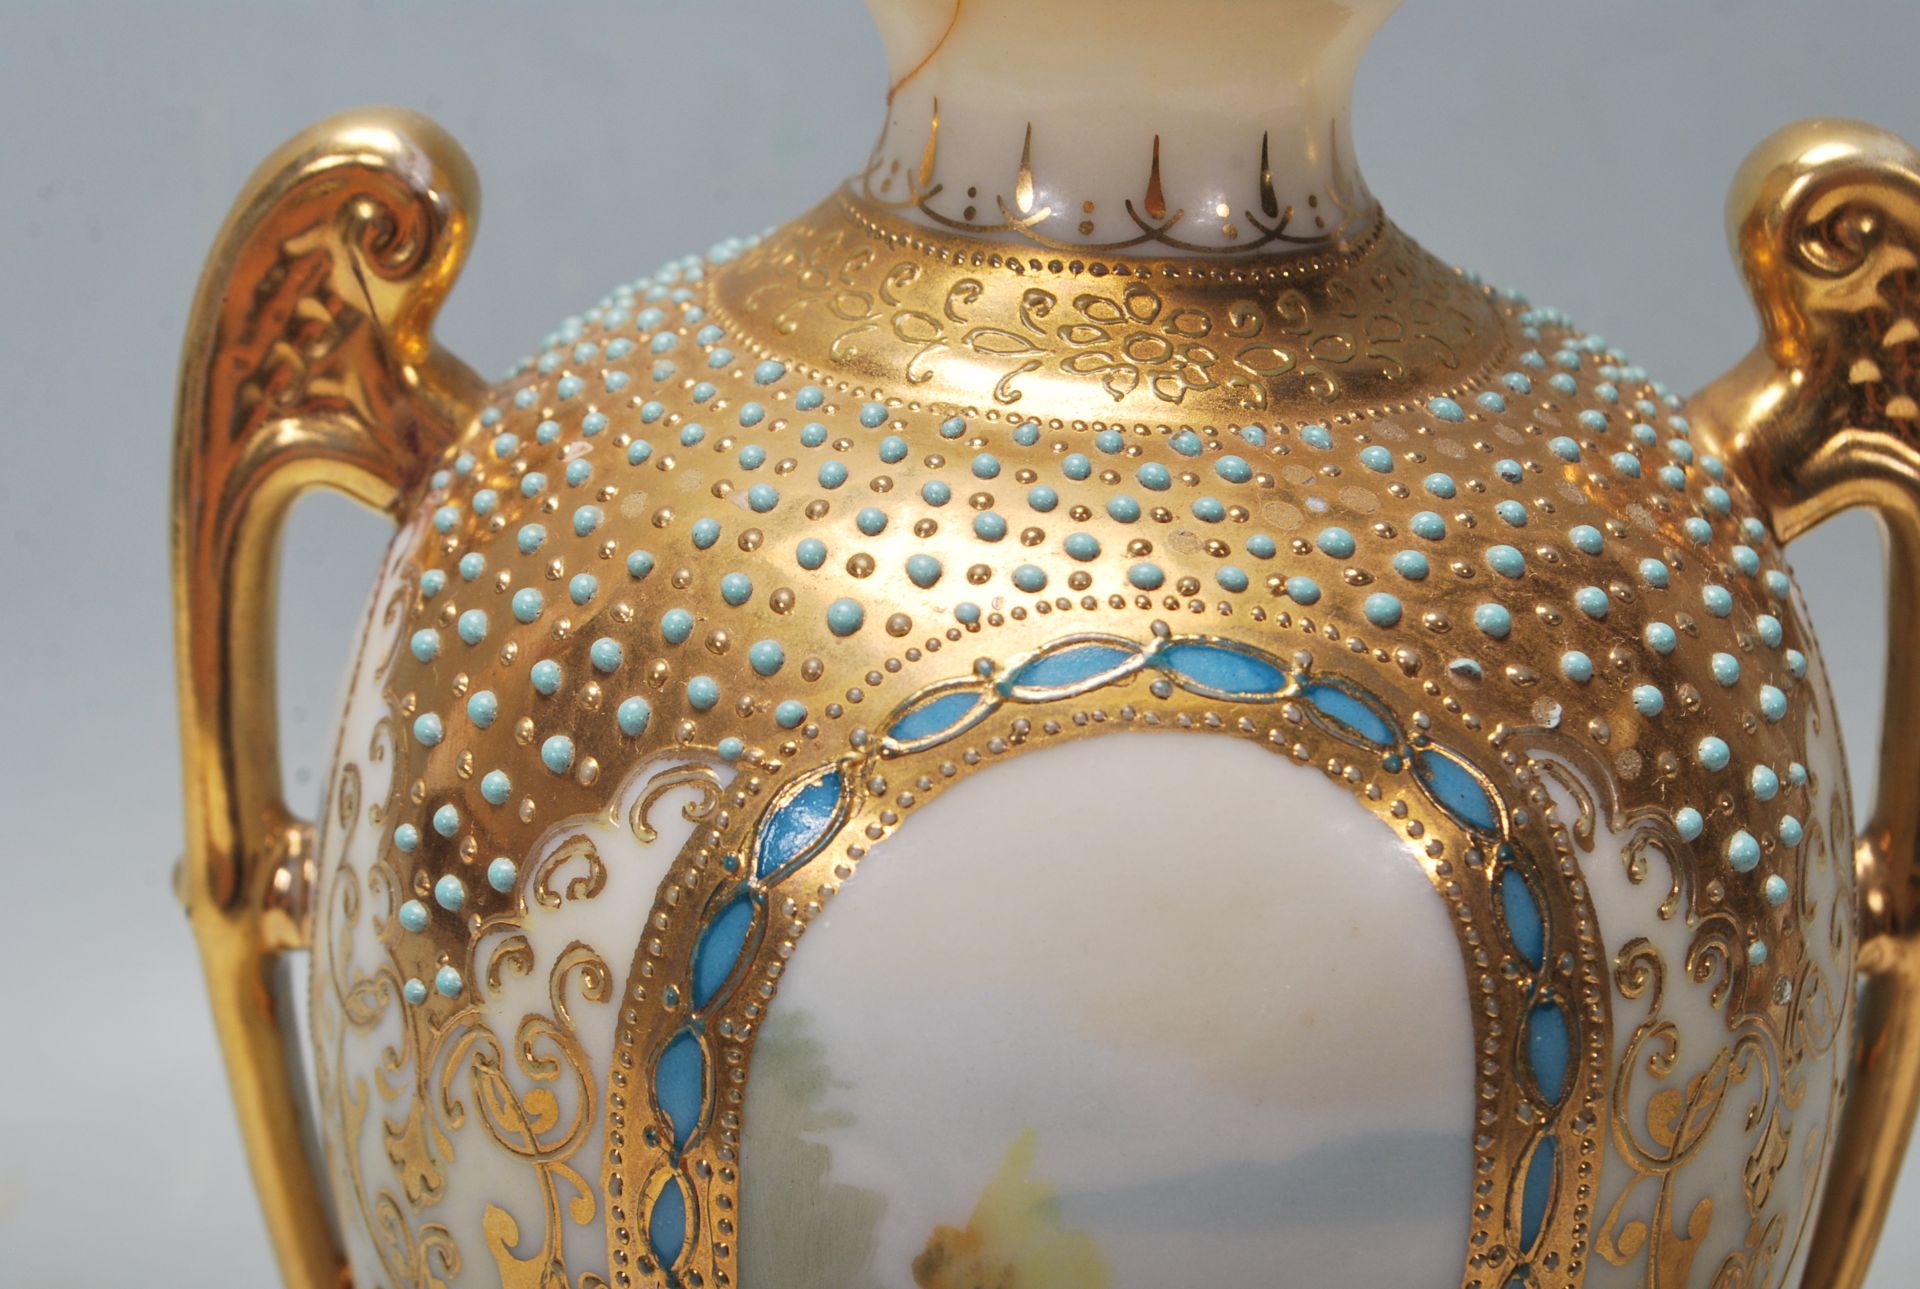 A 20th Century Noritake hand painted mantel lidded vase decorated with raised turquoise jewels, - Image 5 of 10